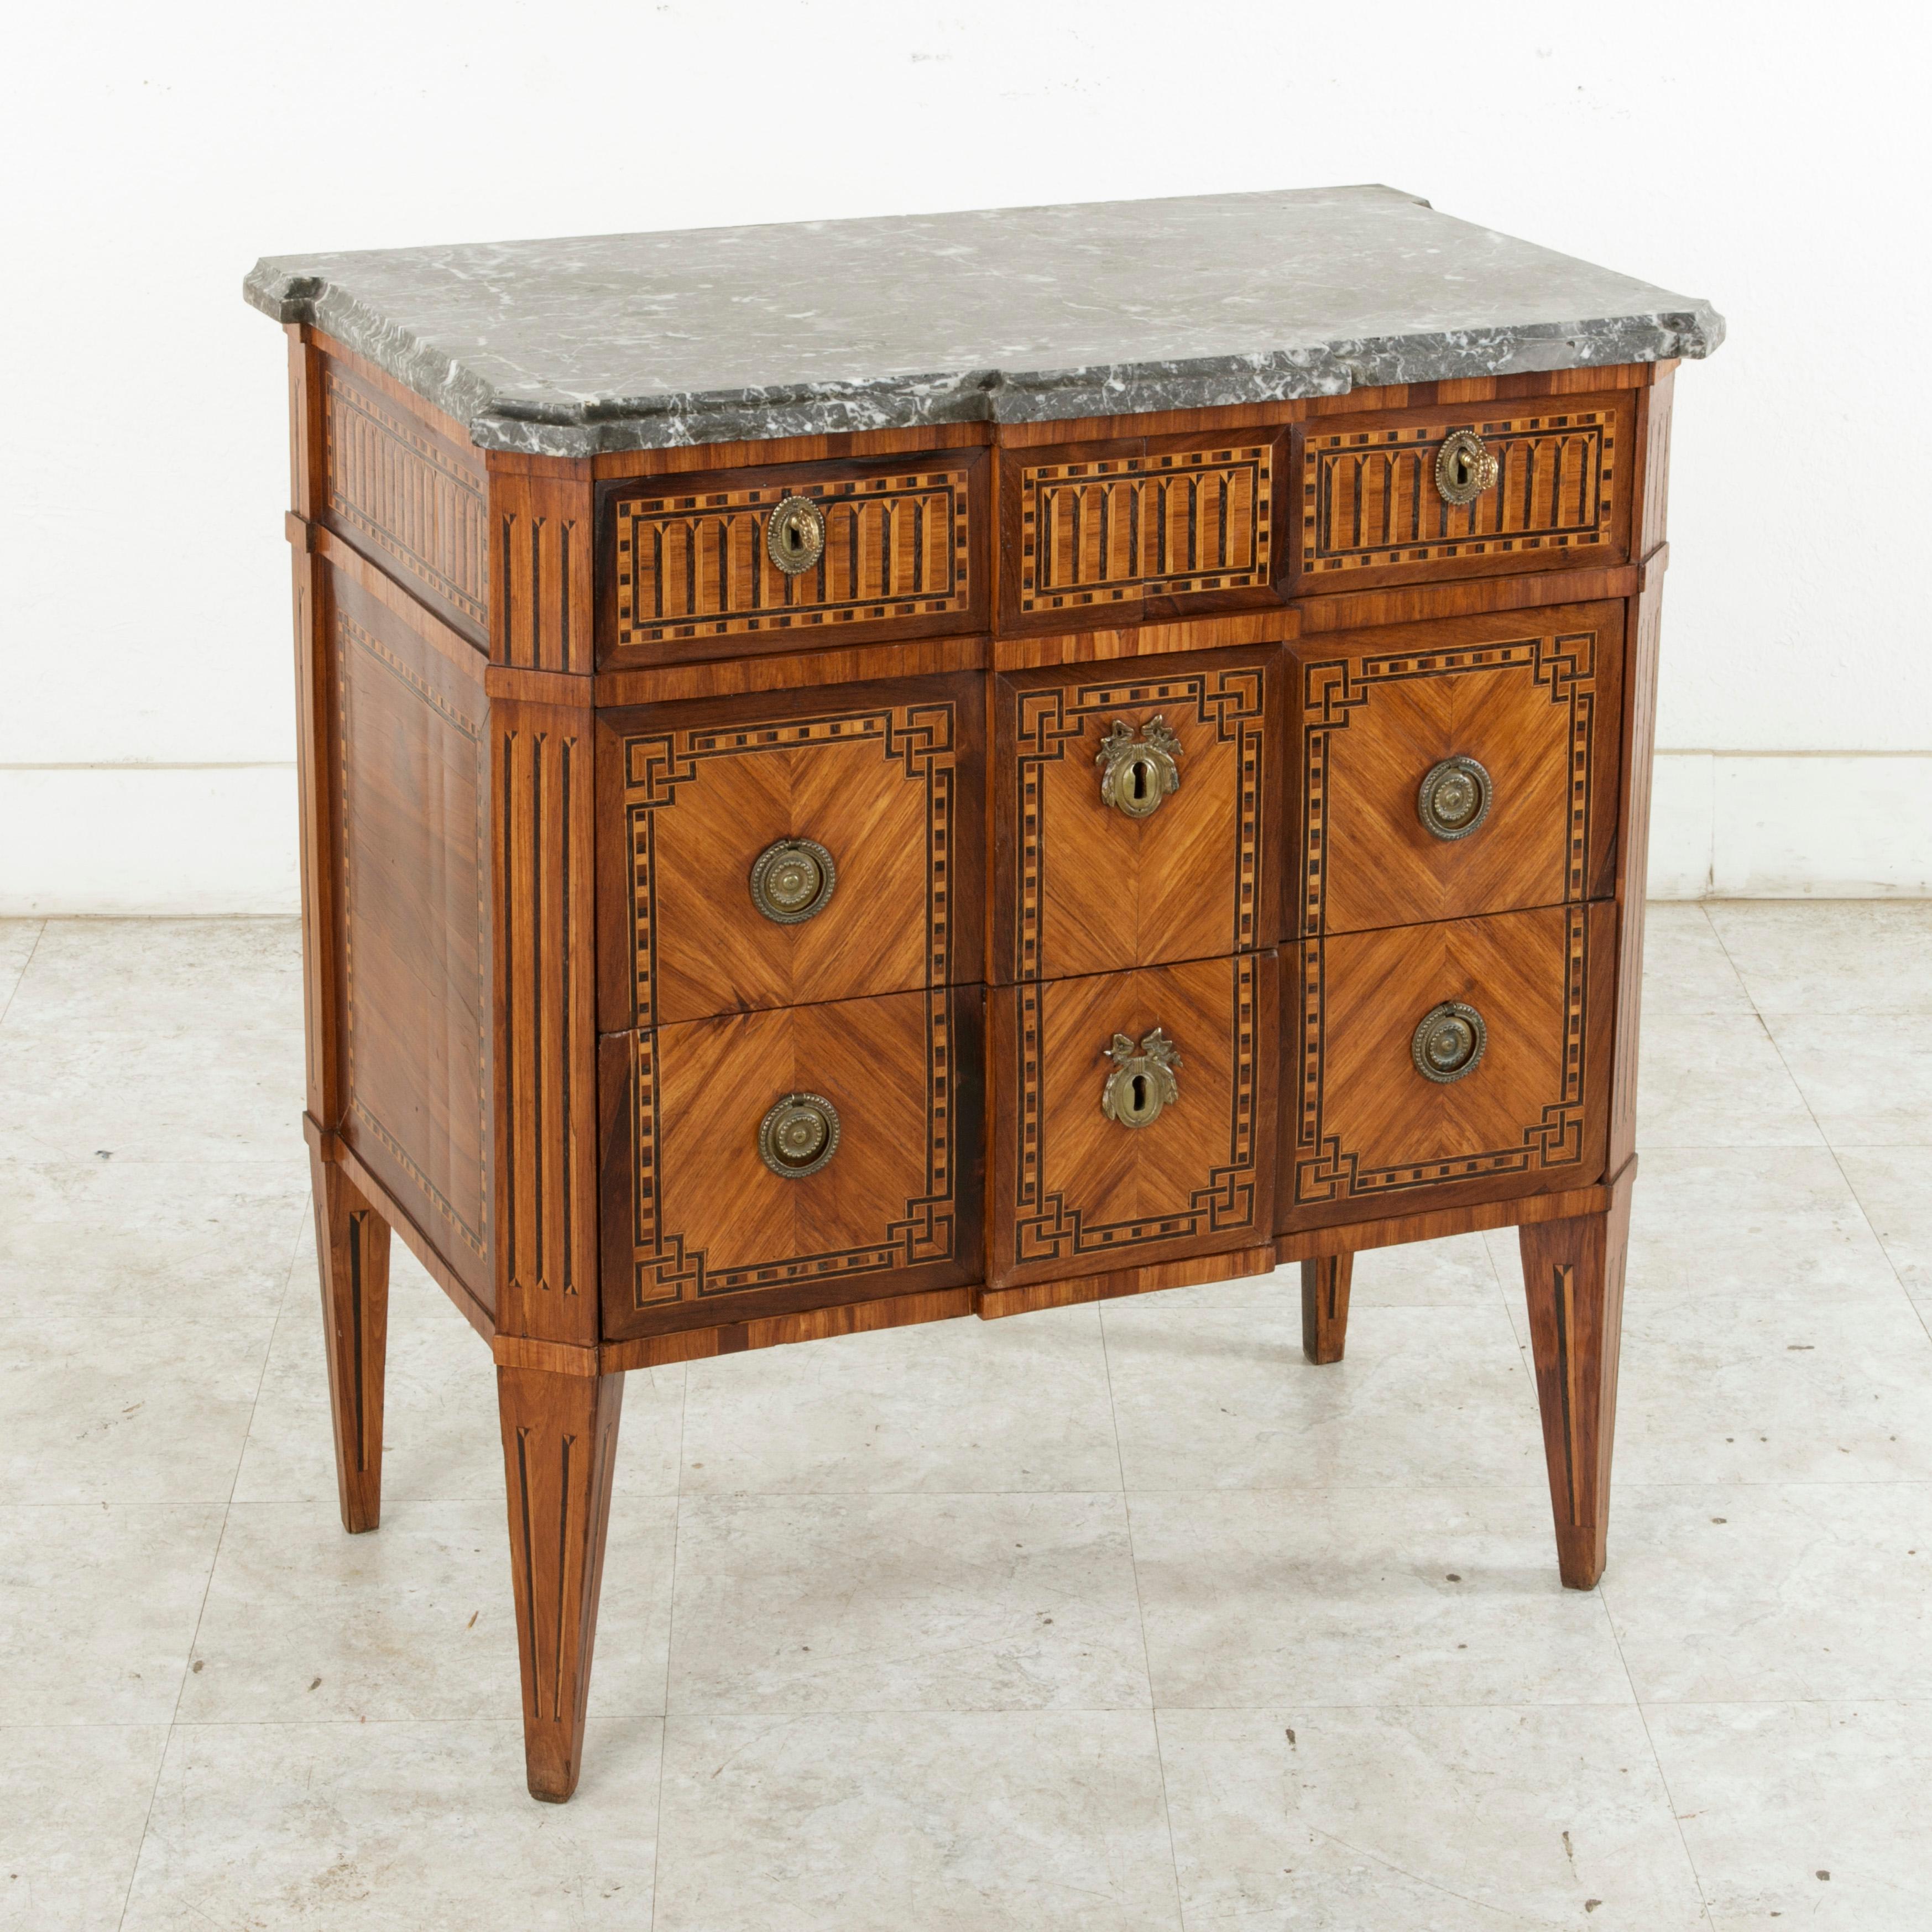 Found in eastern France, this rare smaller scale late 18th century, French Louis XVI period chest features a beveled Saint Anne marble top and a geometric marquetry facade of rosewood, lemon wood, and ebonized pear wood. A marquetry gallery forms